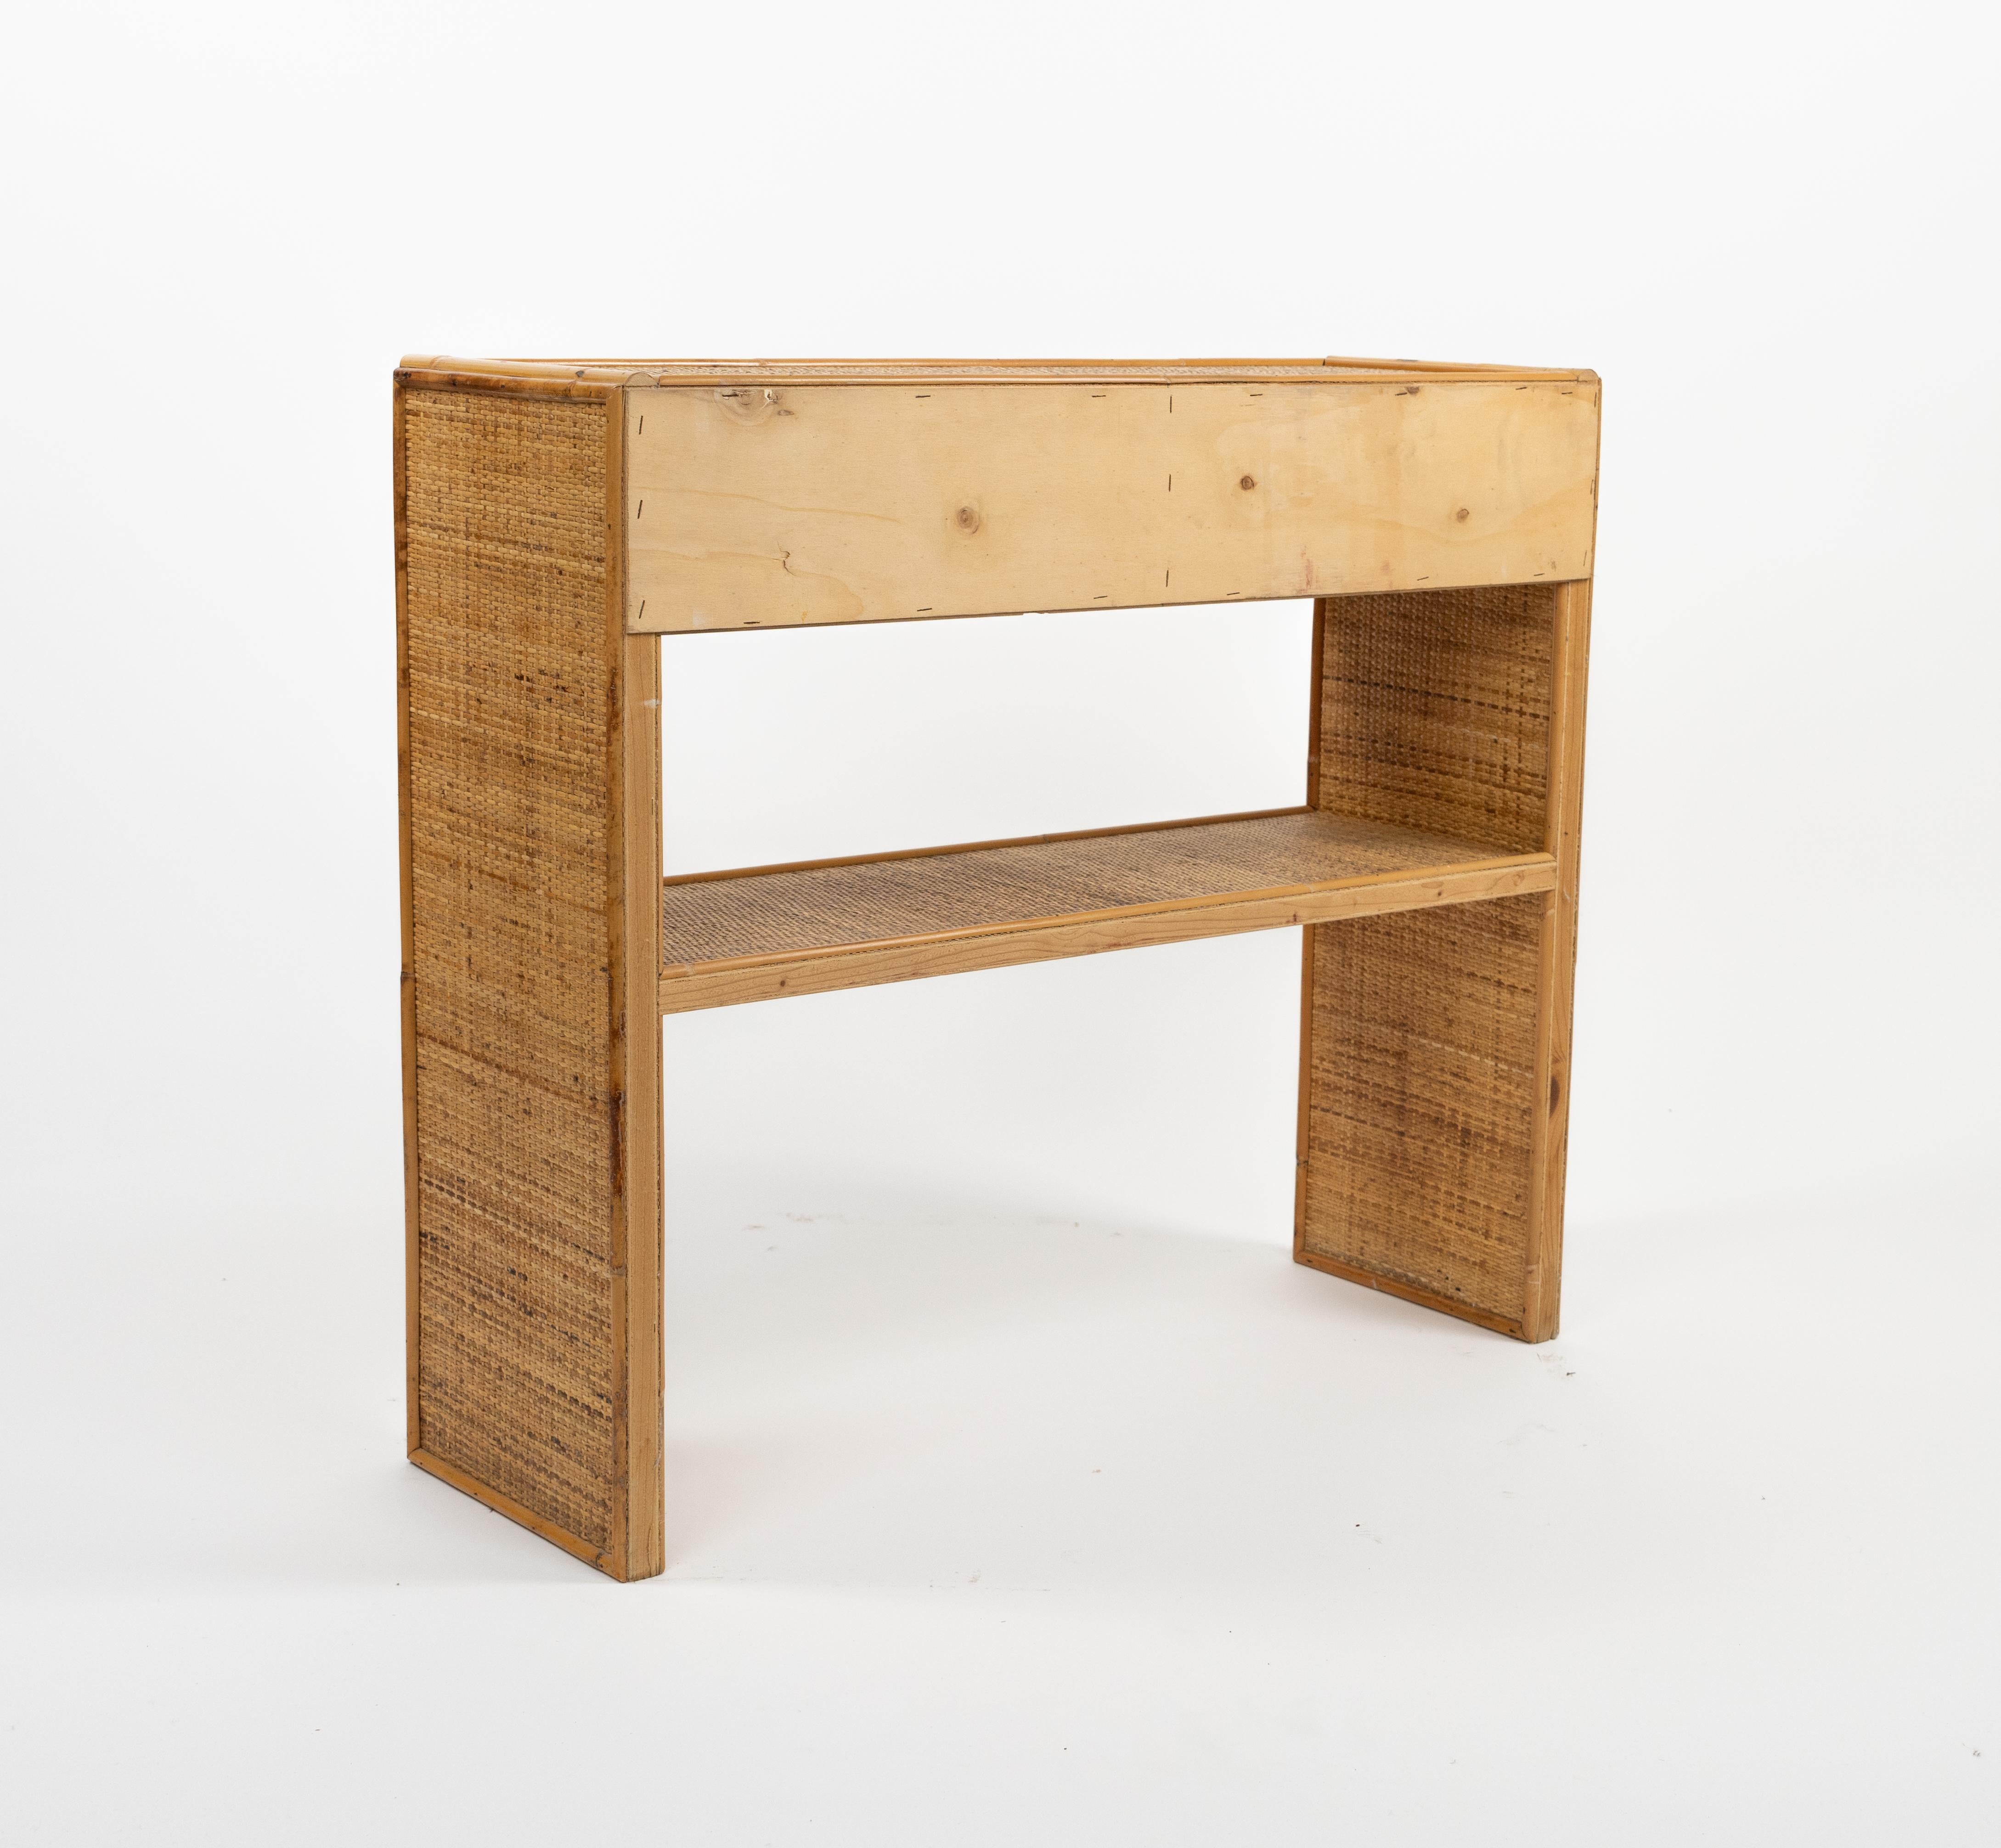 Midcentury Bamboo and Rattan Console Table with Drawers, Italy 1970s For Sale 9